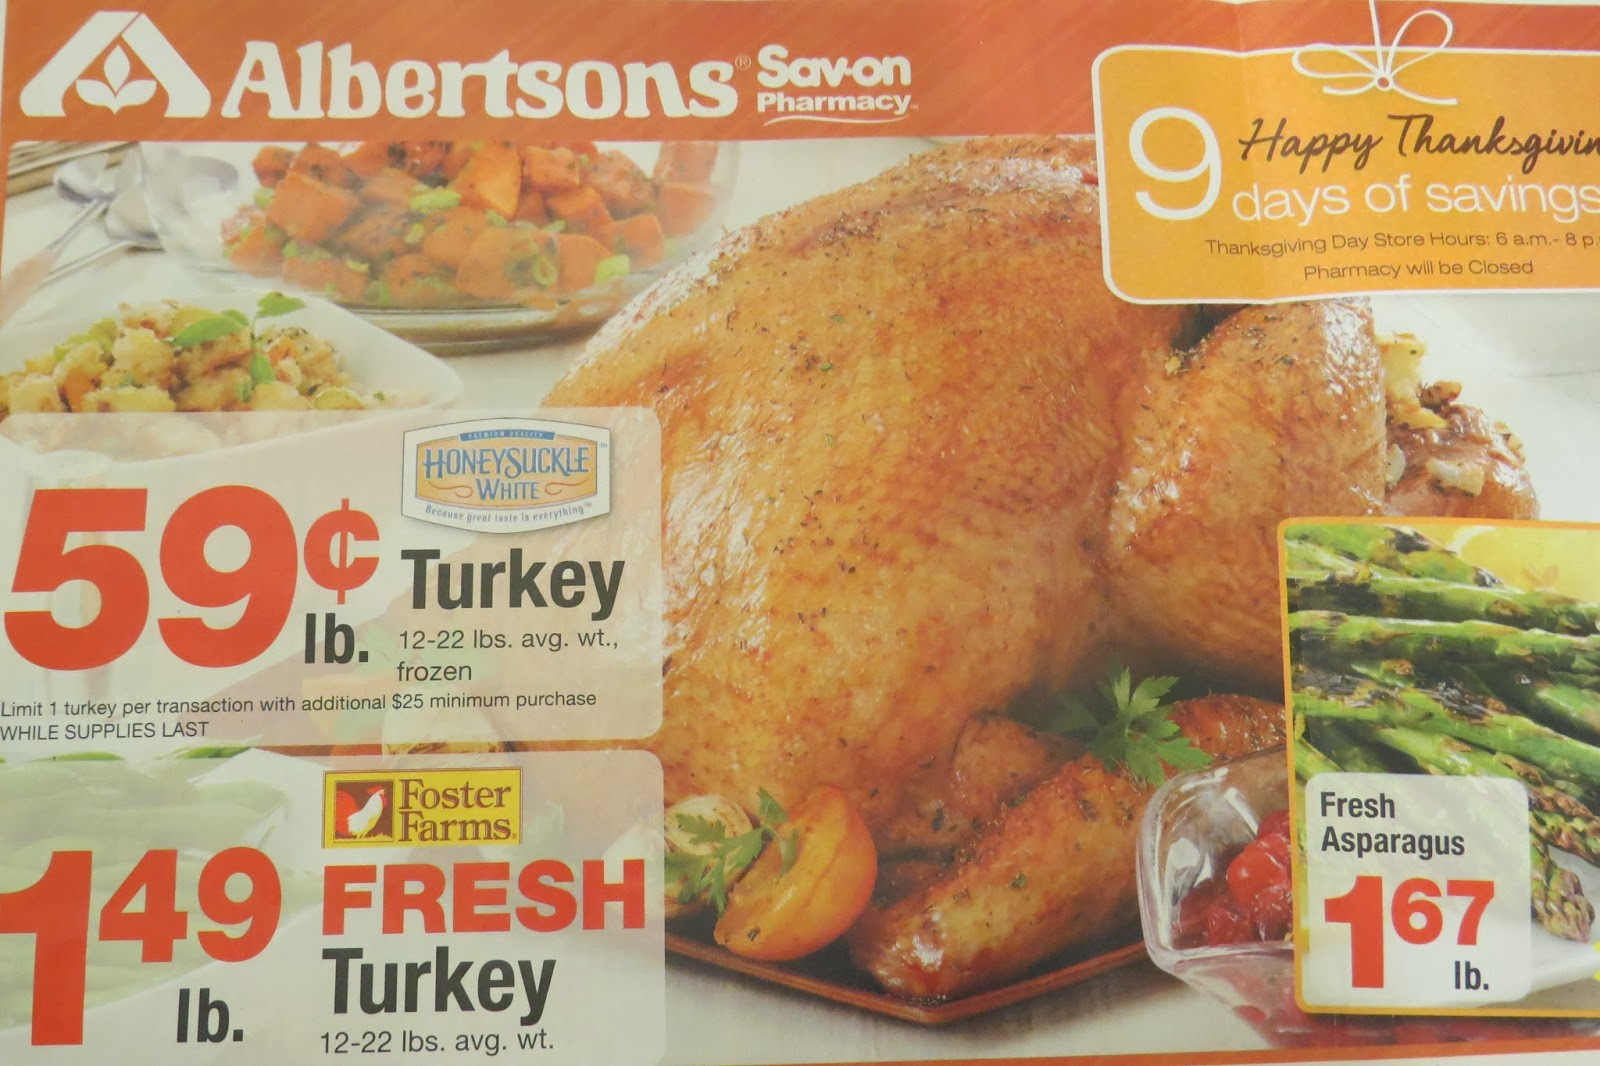 The Best Albertsons Thanksgiving Dinner Best Diet and Healthy Recipes